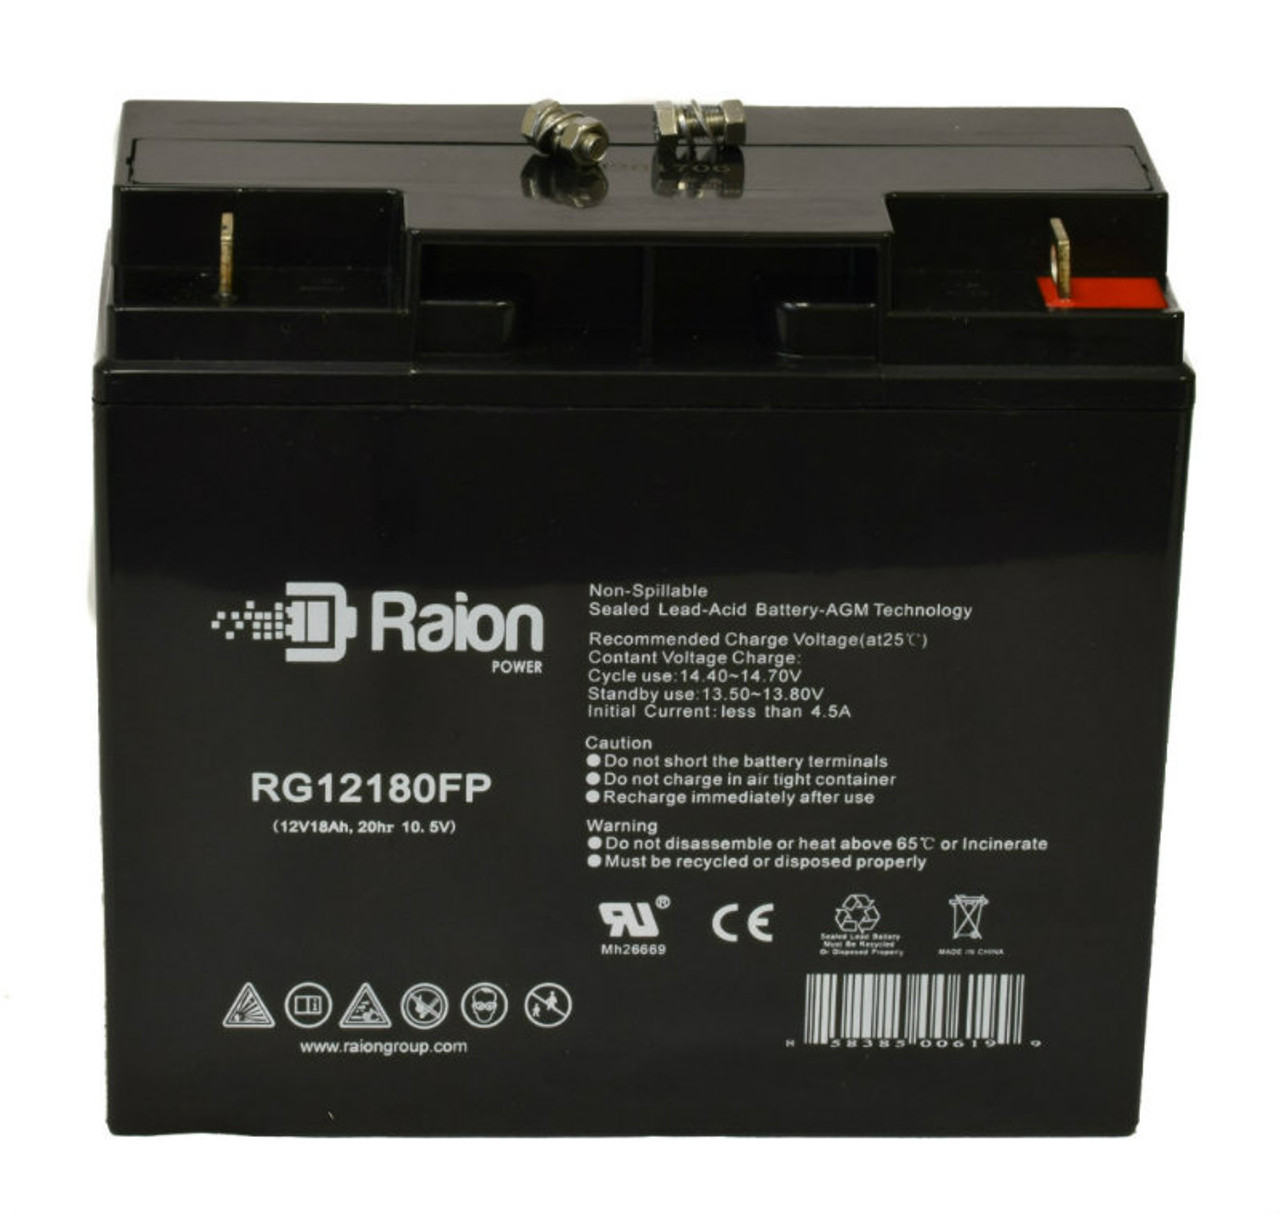 Raion Power RG12180FP 12V 18Ah Lead Acid Battery for Fun E-Cycle Mobility Scooter N4RT